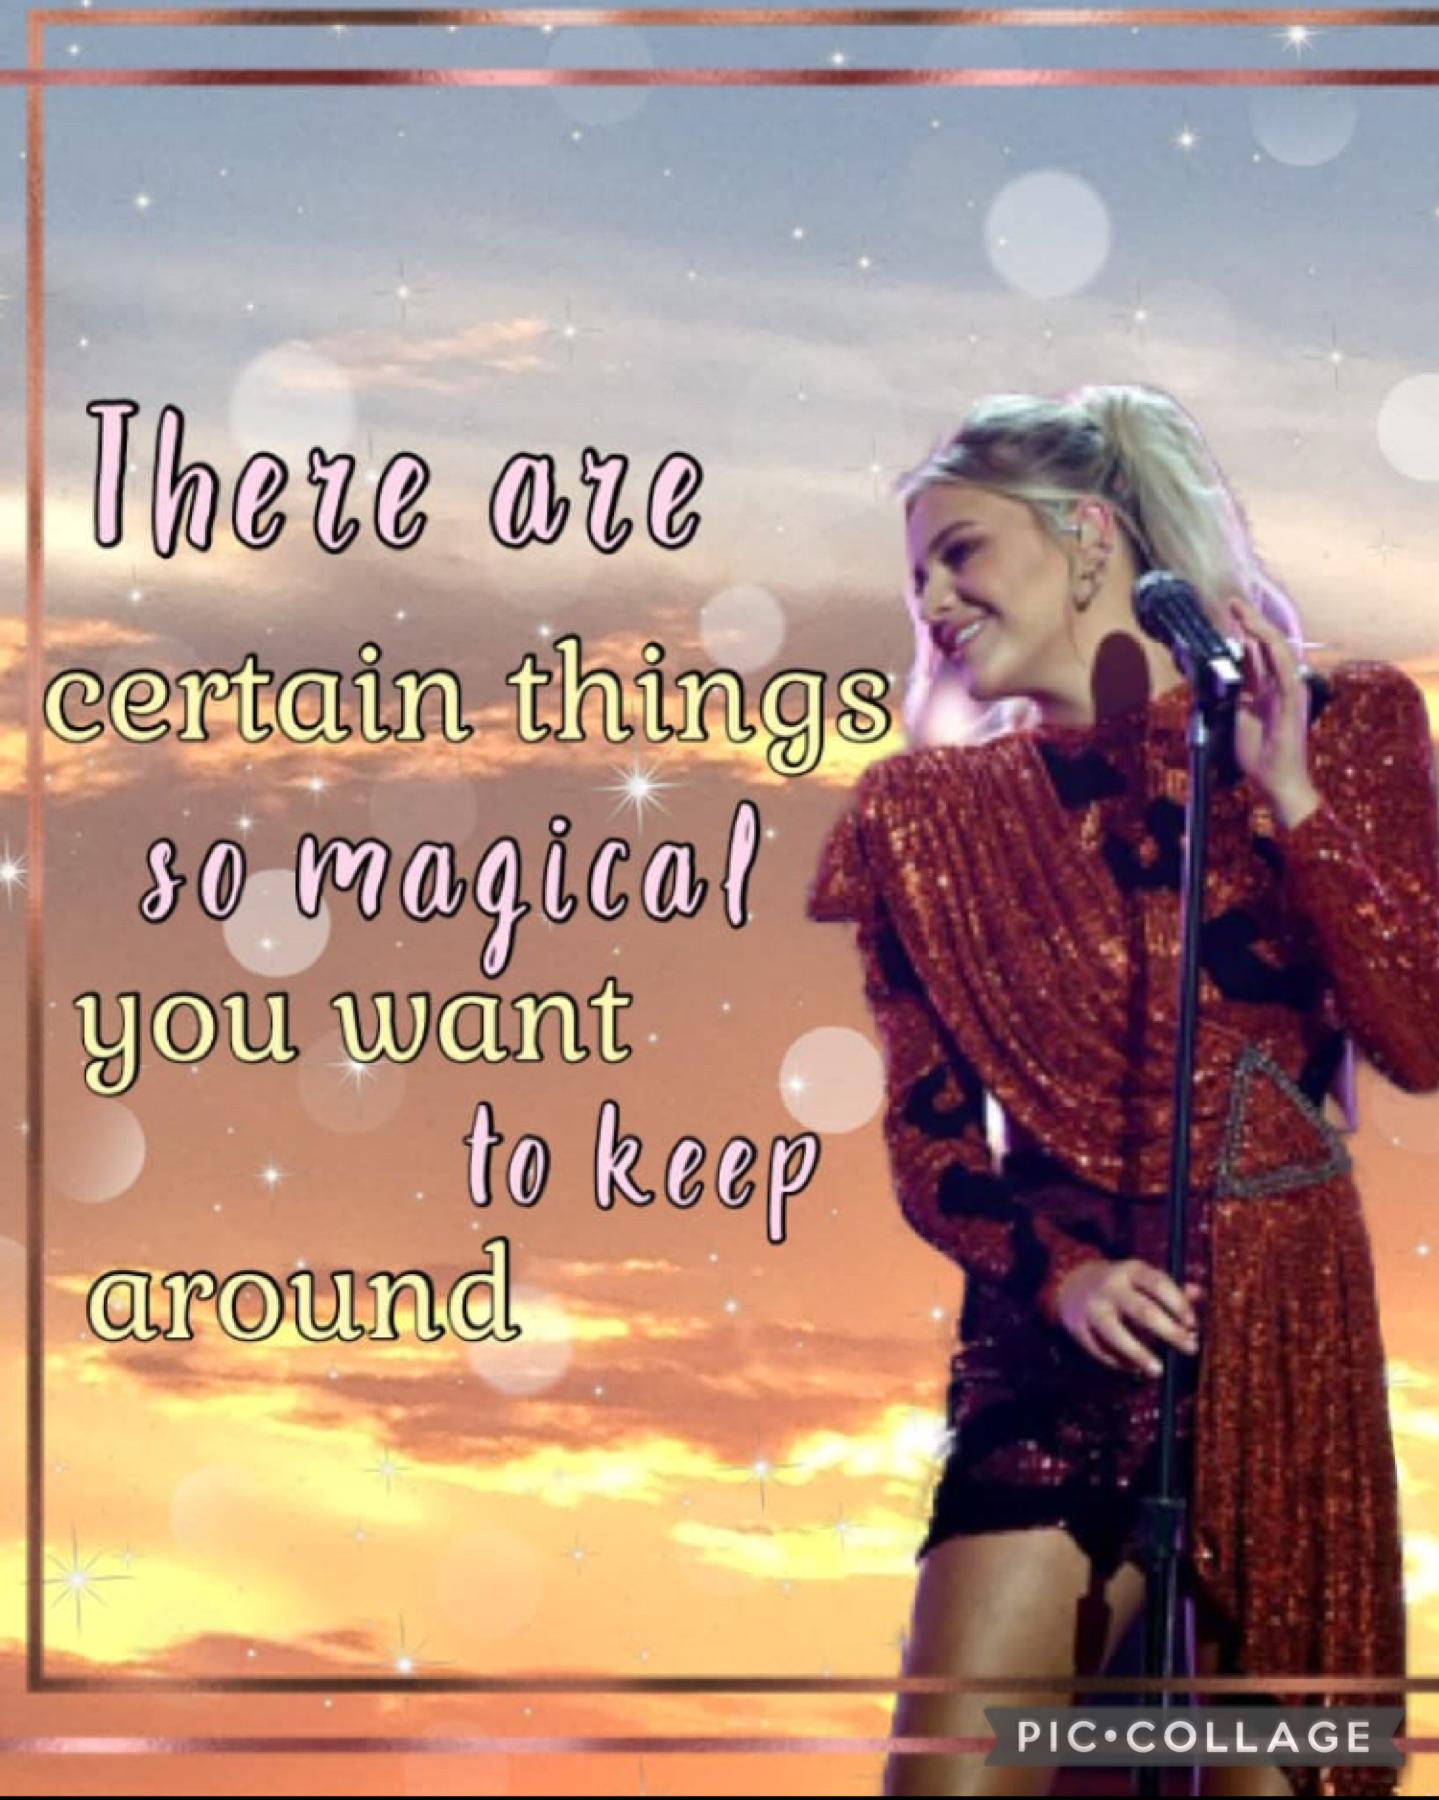 27.1.22 Kelsea Ballerini aesthetic collage and entry to Lemonwater- contest. 